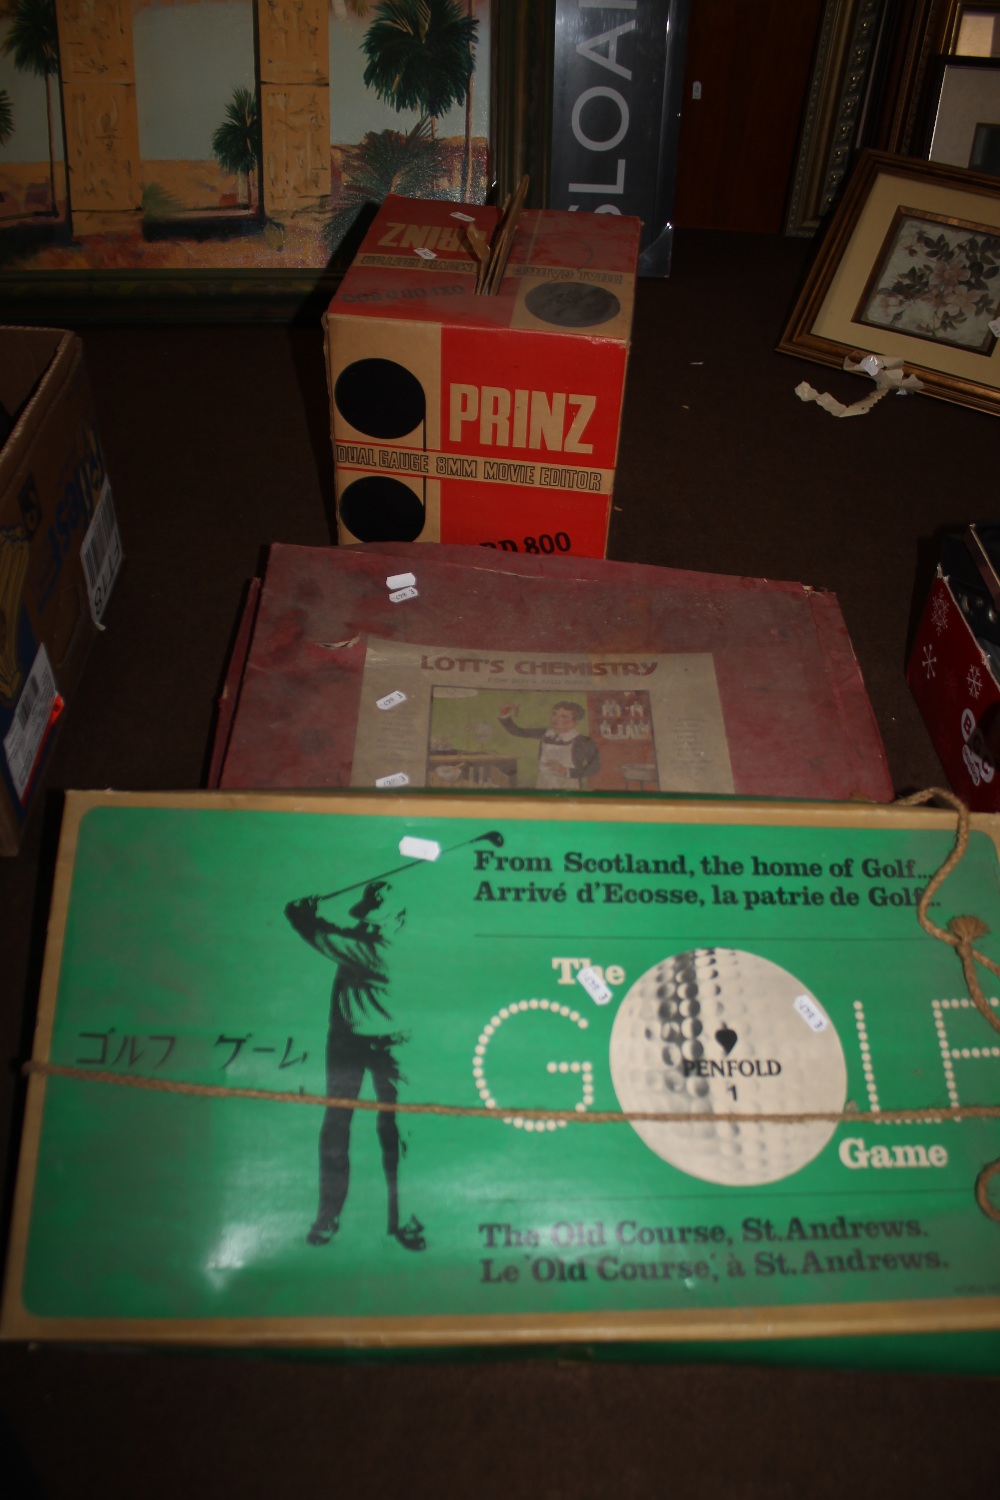 A PRINZ MOVIE EDITOR, A LOTTS CHEMISTRY SET (NOT COMPLETE), THE GOLF GAME ETC.